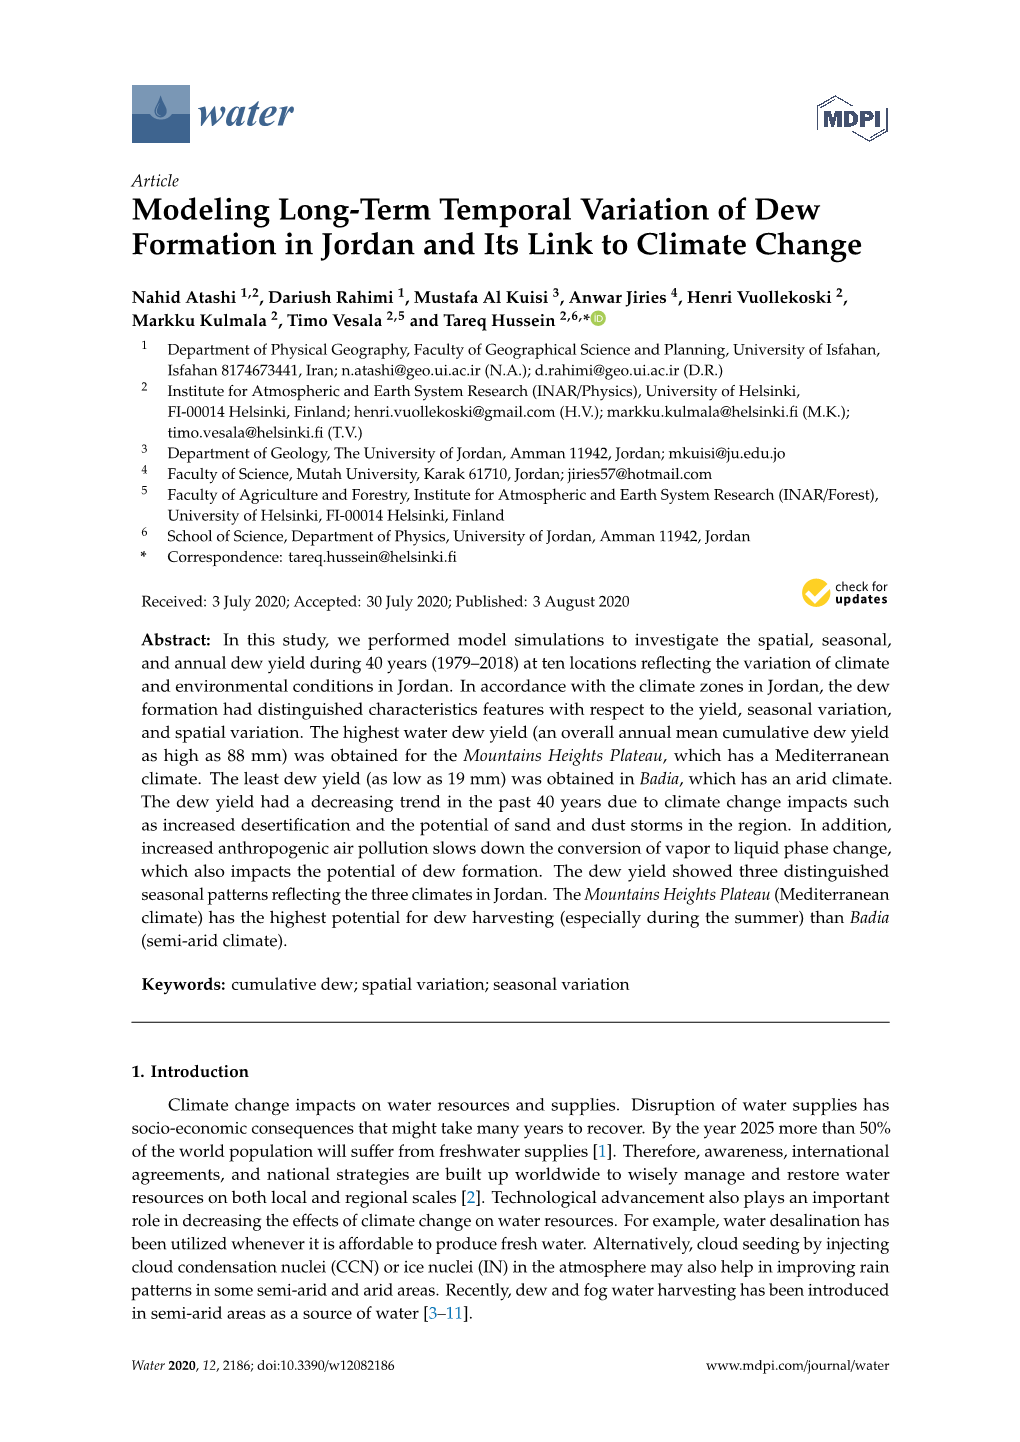 Modeling Long-Term Temporal Variation of Dew Formation in Jordan and Its Link to Climate Change